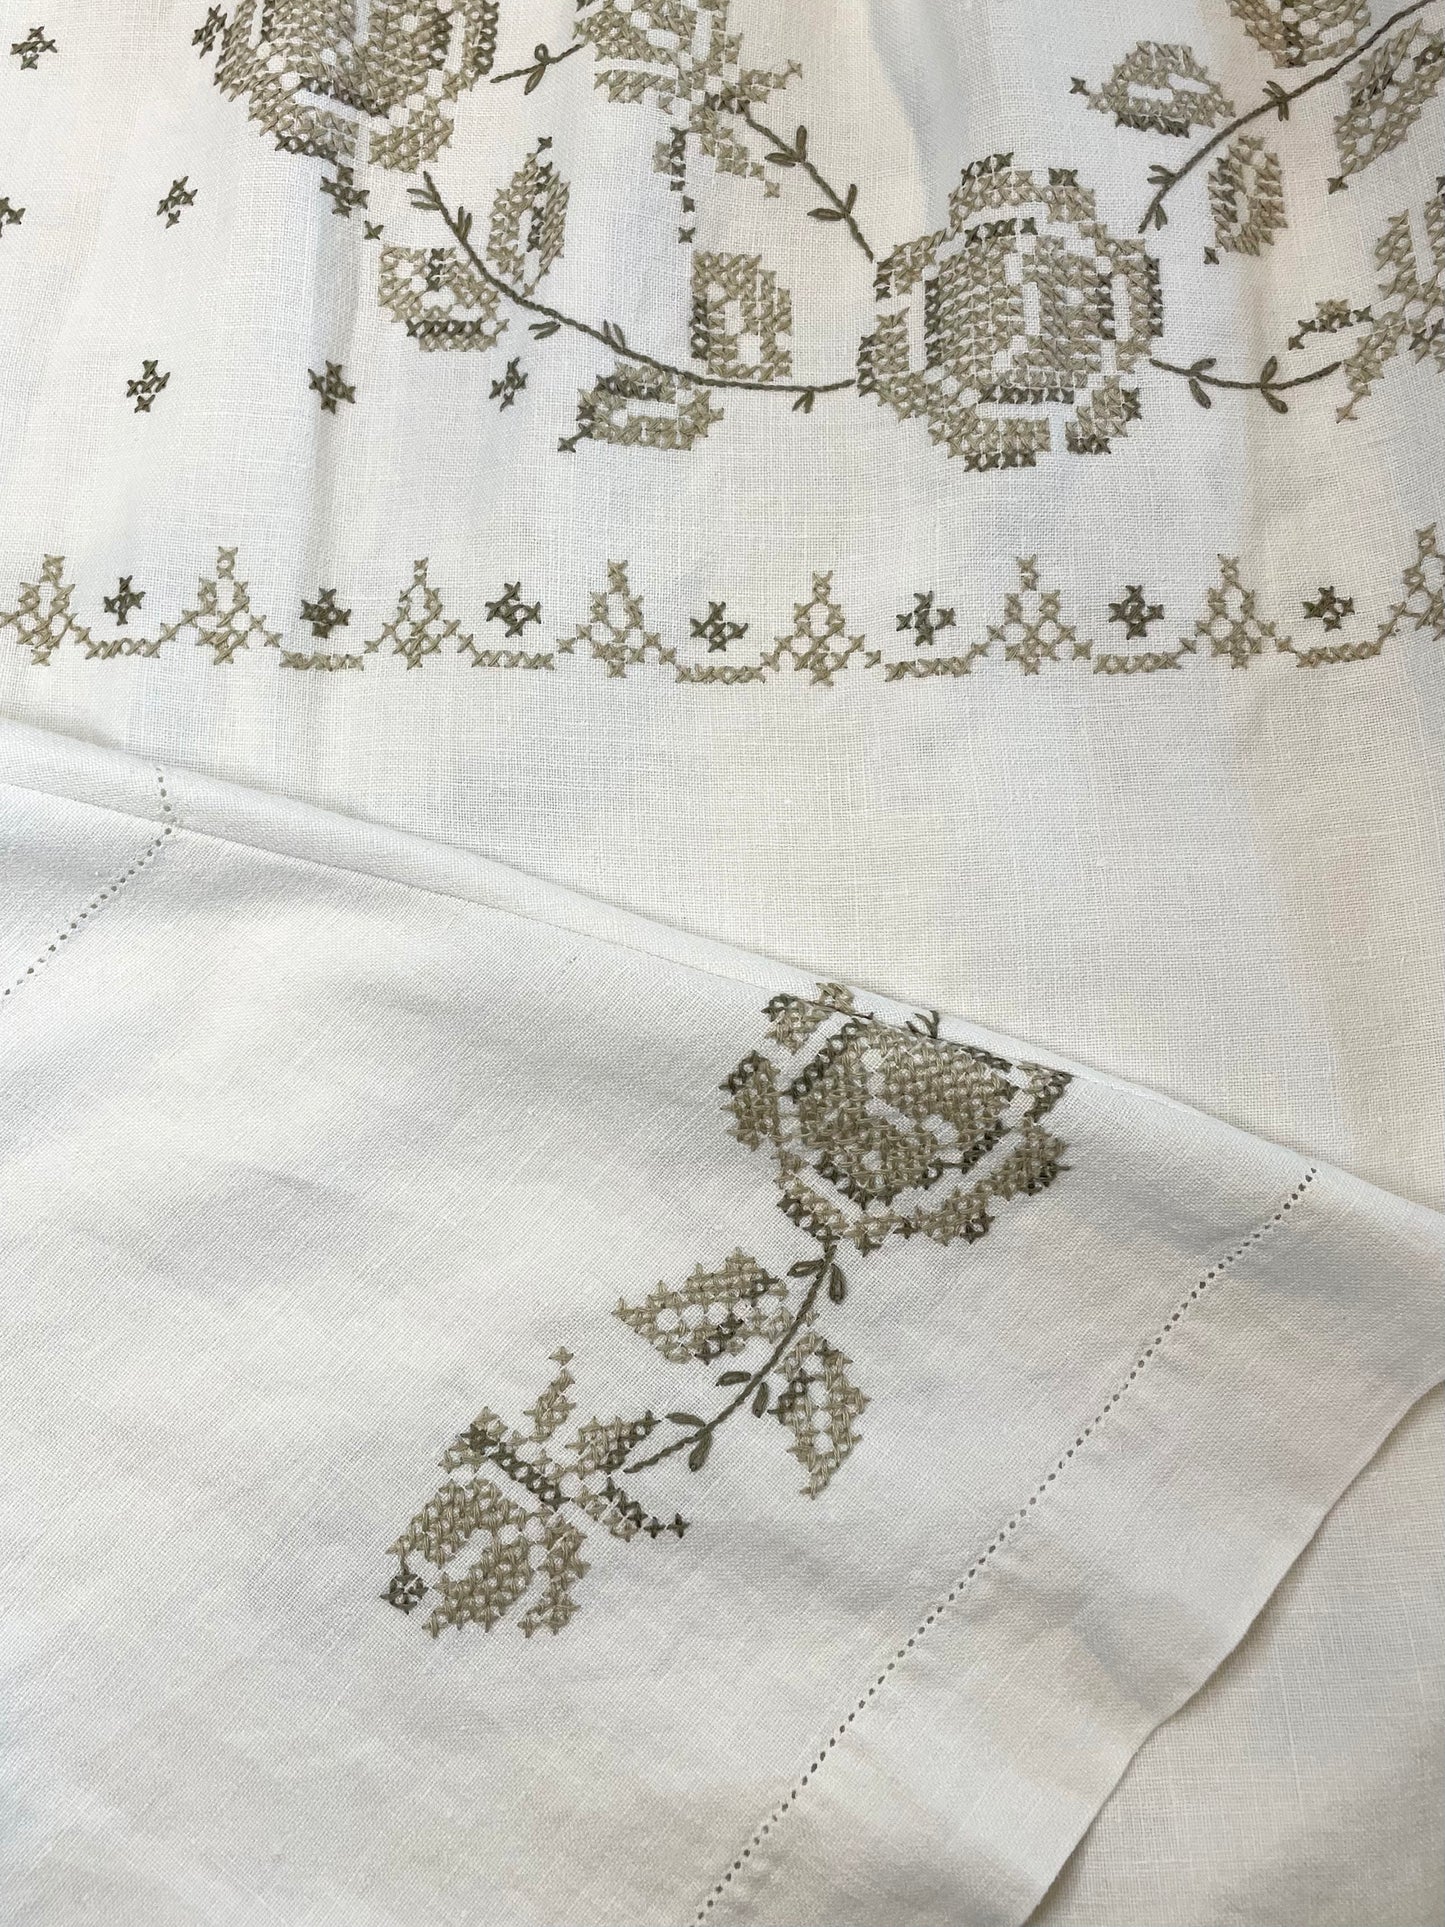 *Soft Earth Tone Floral* ~ Vintage Hand Embroidered Tablecloth Dress ~ Size 2X